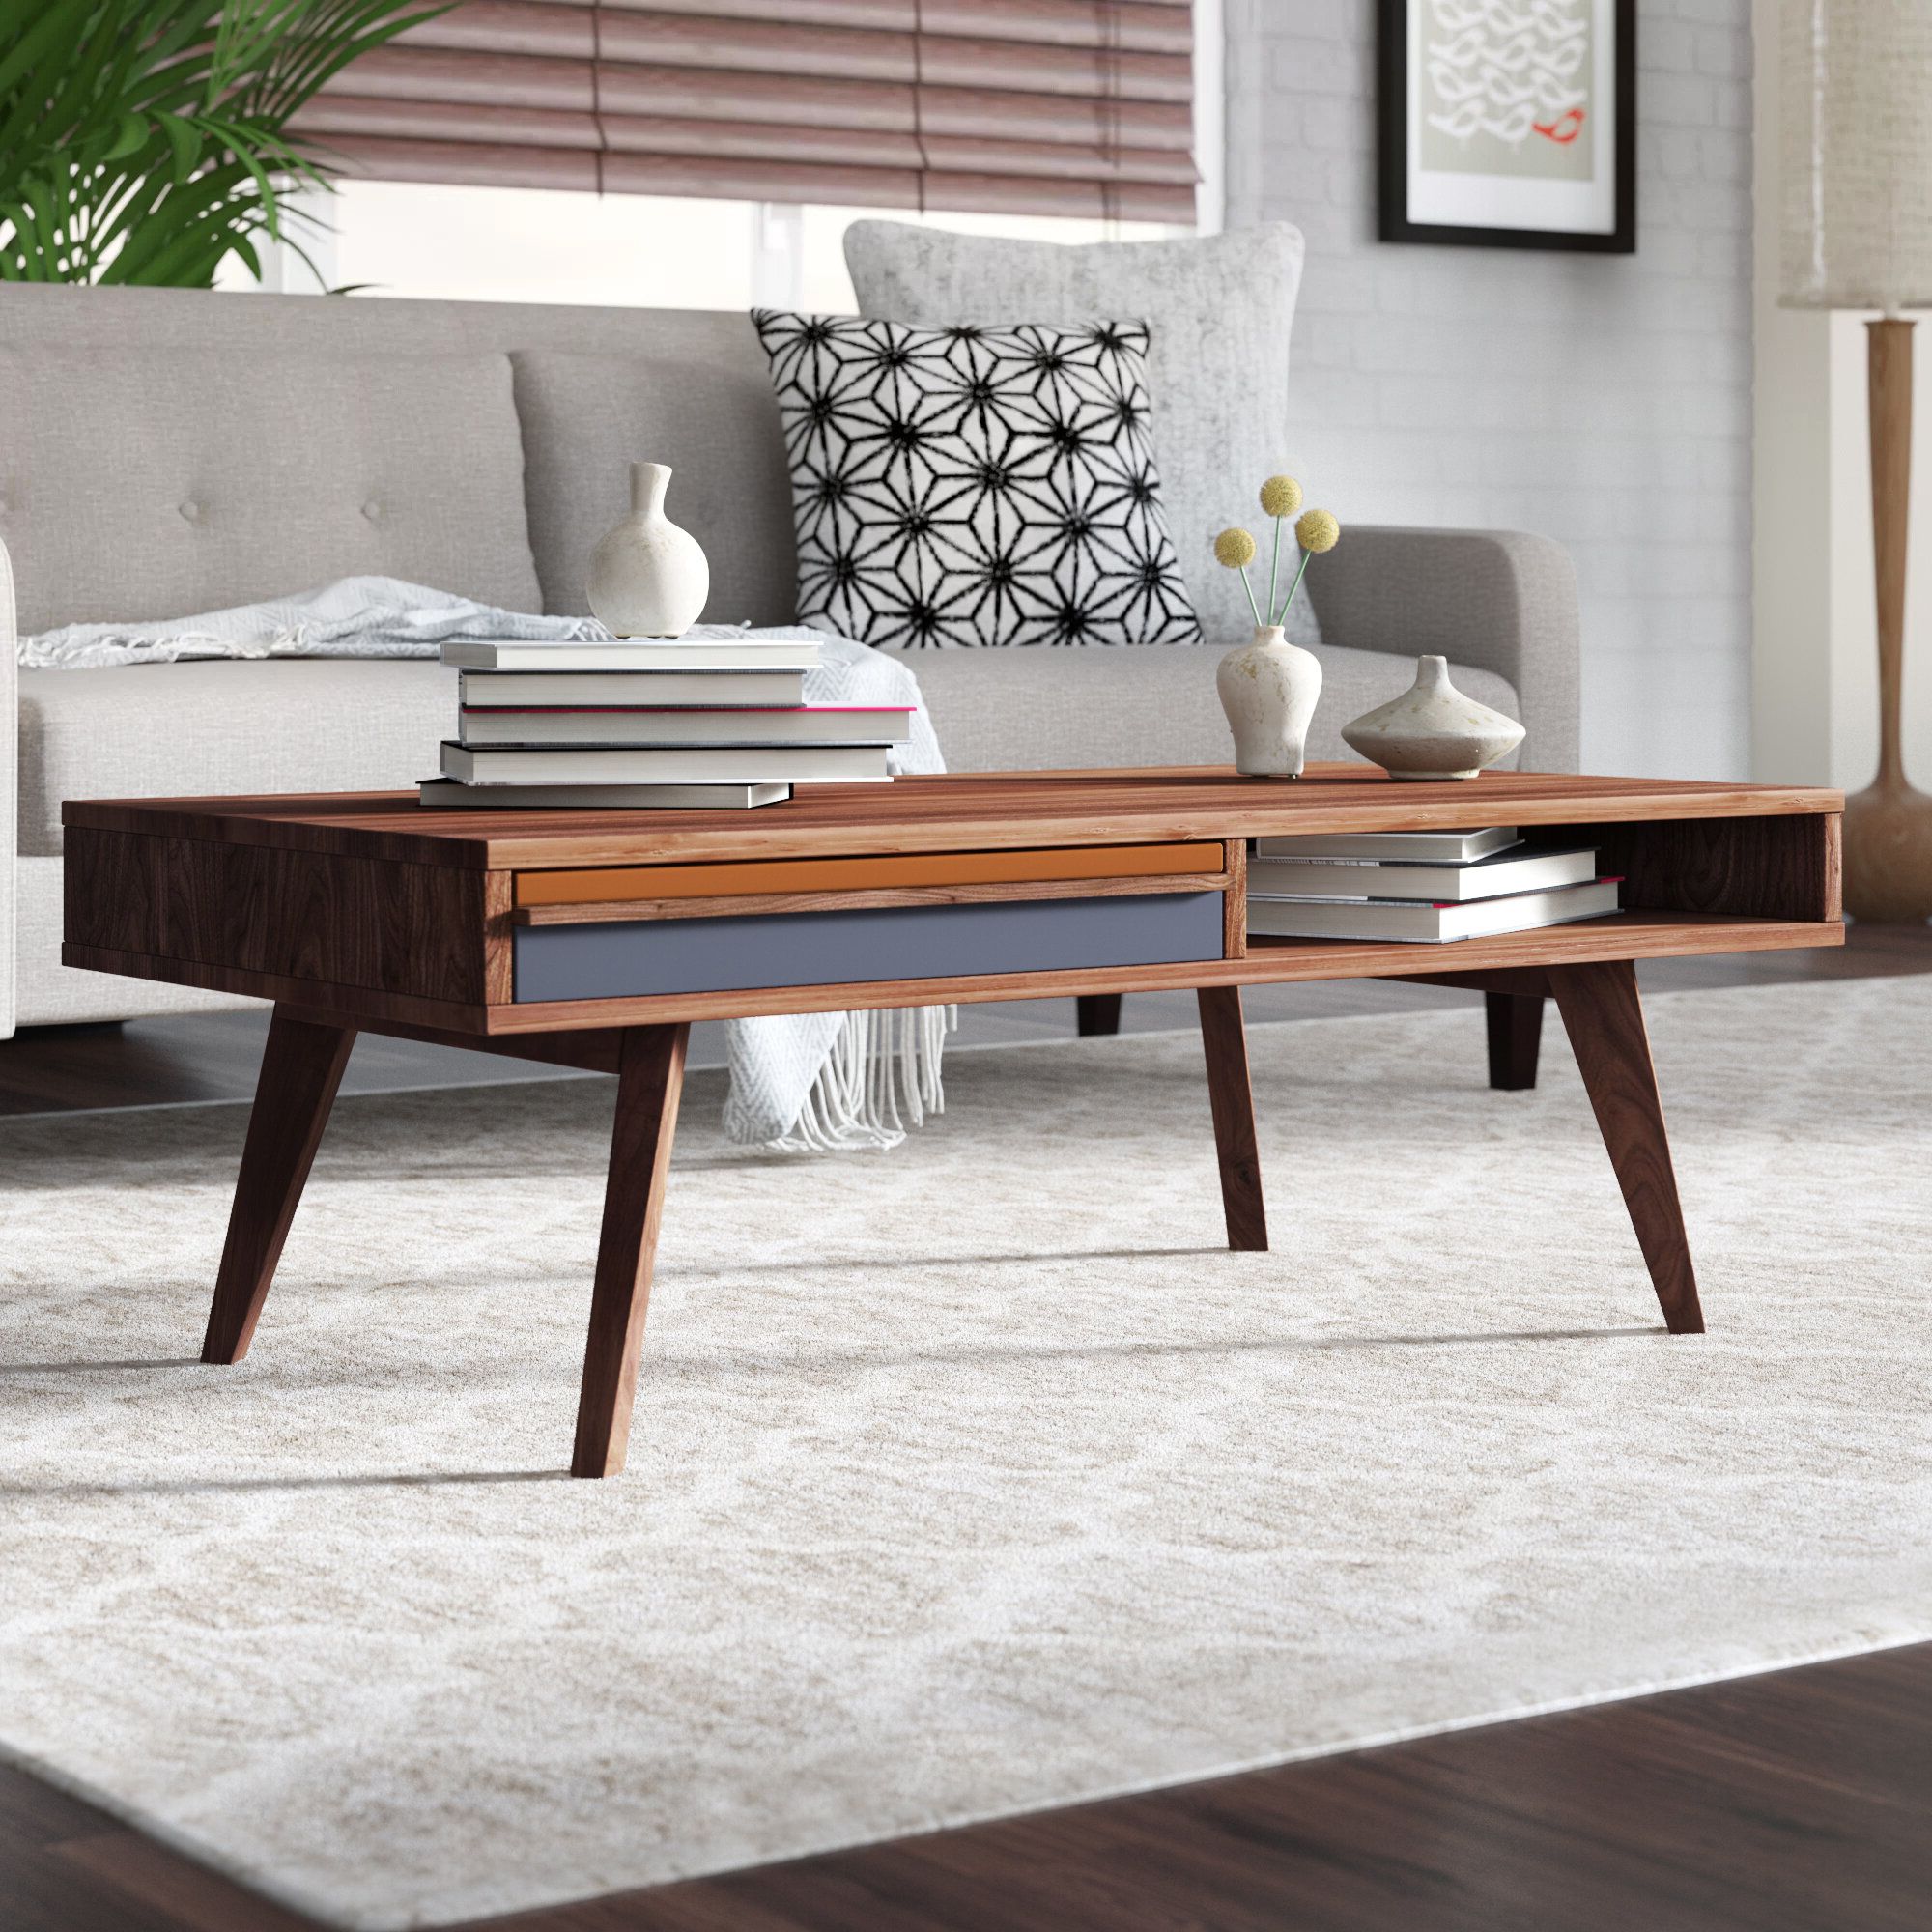 Mid Century Modern Coffee Table – Ideas On Foter Pertaining To Mid Century Modern Coffee Tables (View 3 of 20)